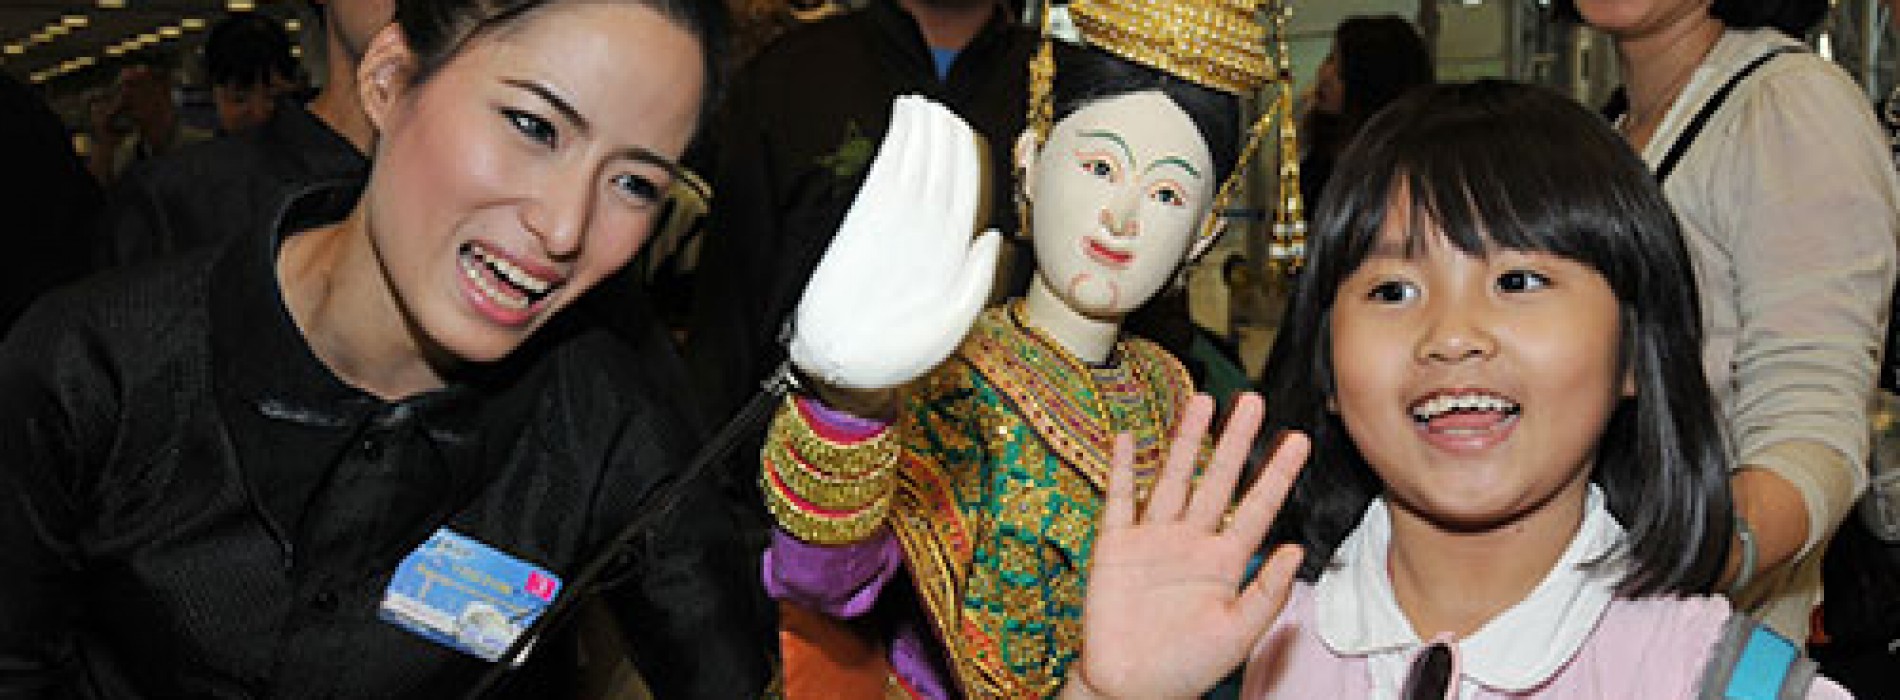 Thailand visitor arrivals surge 25% in Jan-May 2015